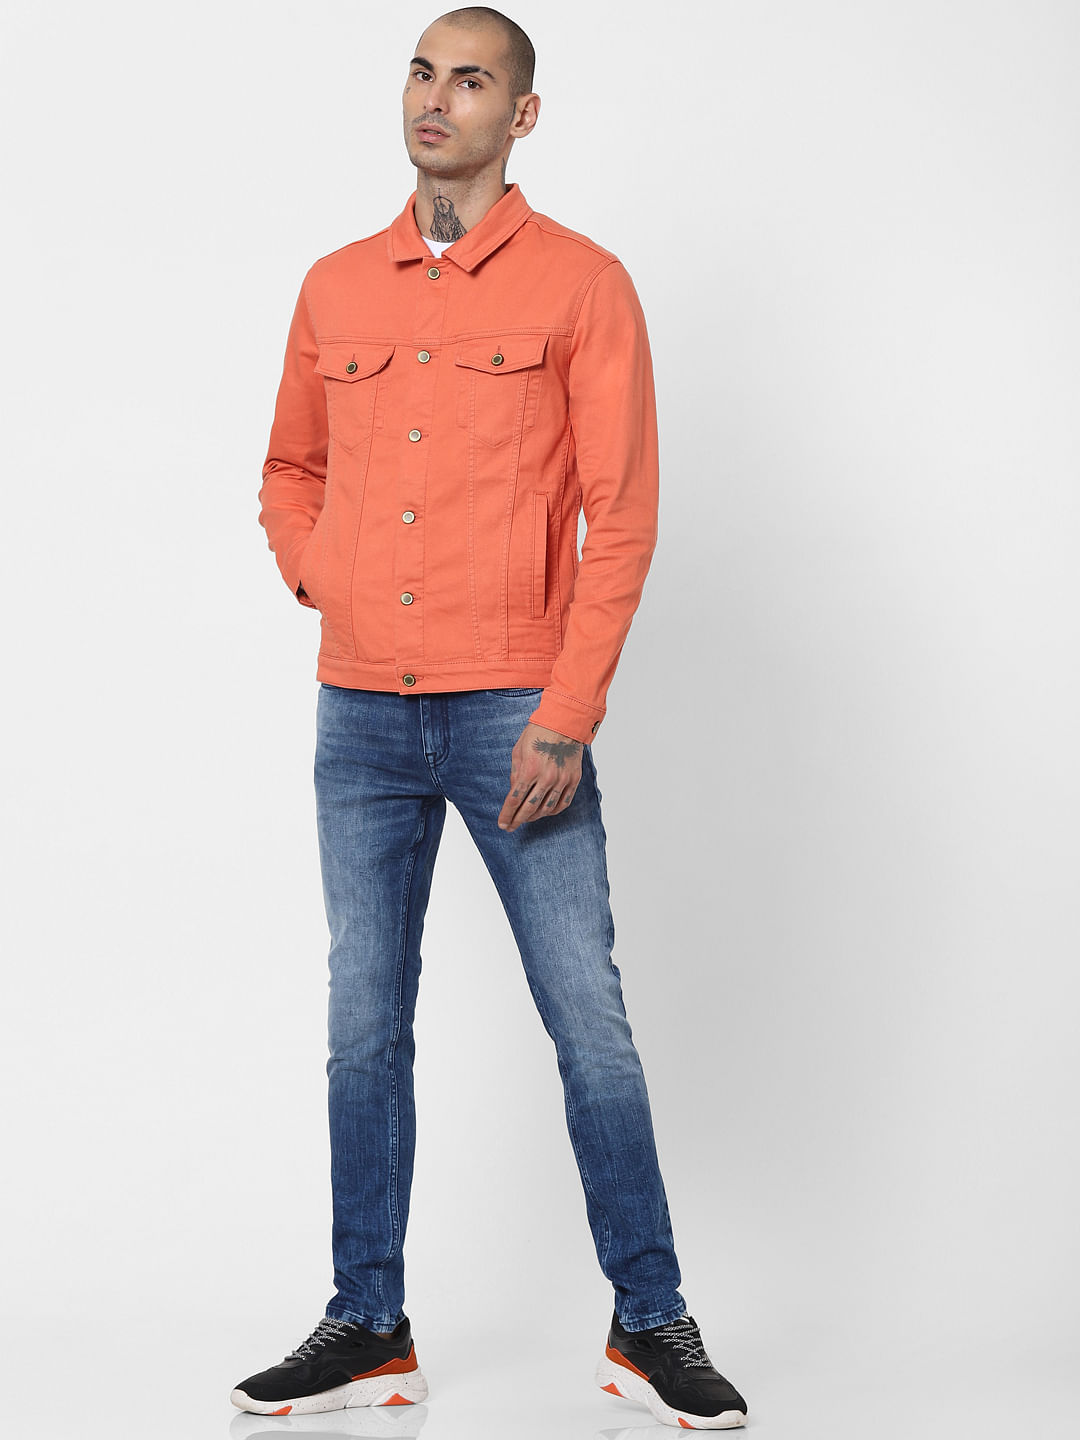 Light Blue Denim Jacket with Orange Long Sleeve Shirt Outfits For Men 2  ideas  outfits  Lookastic